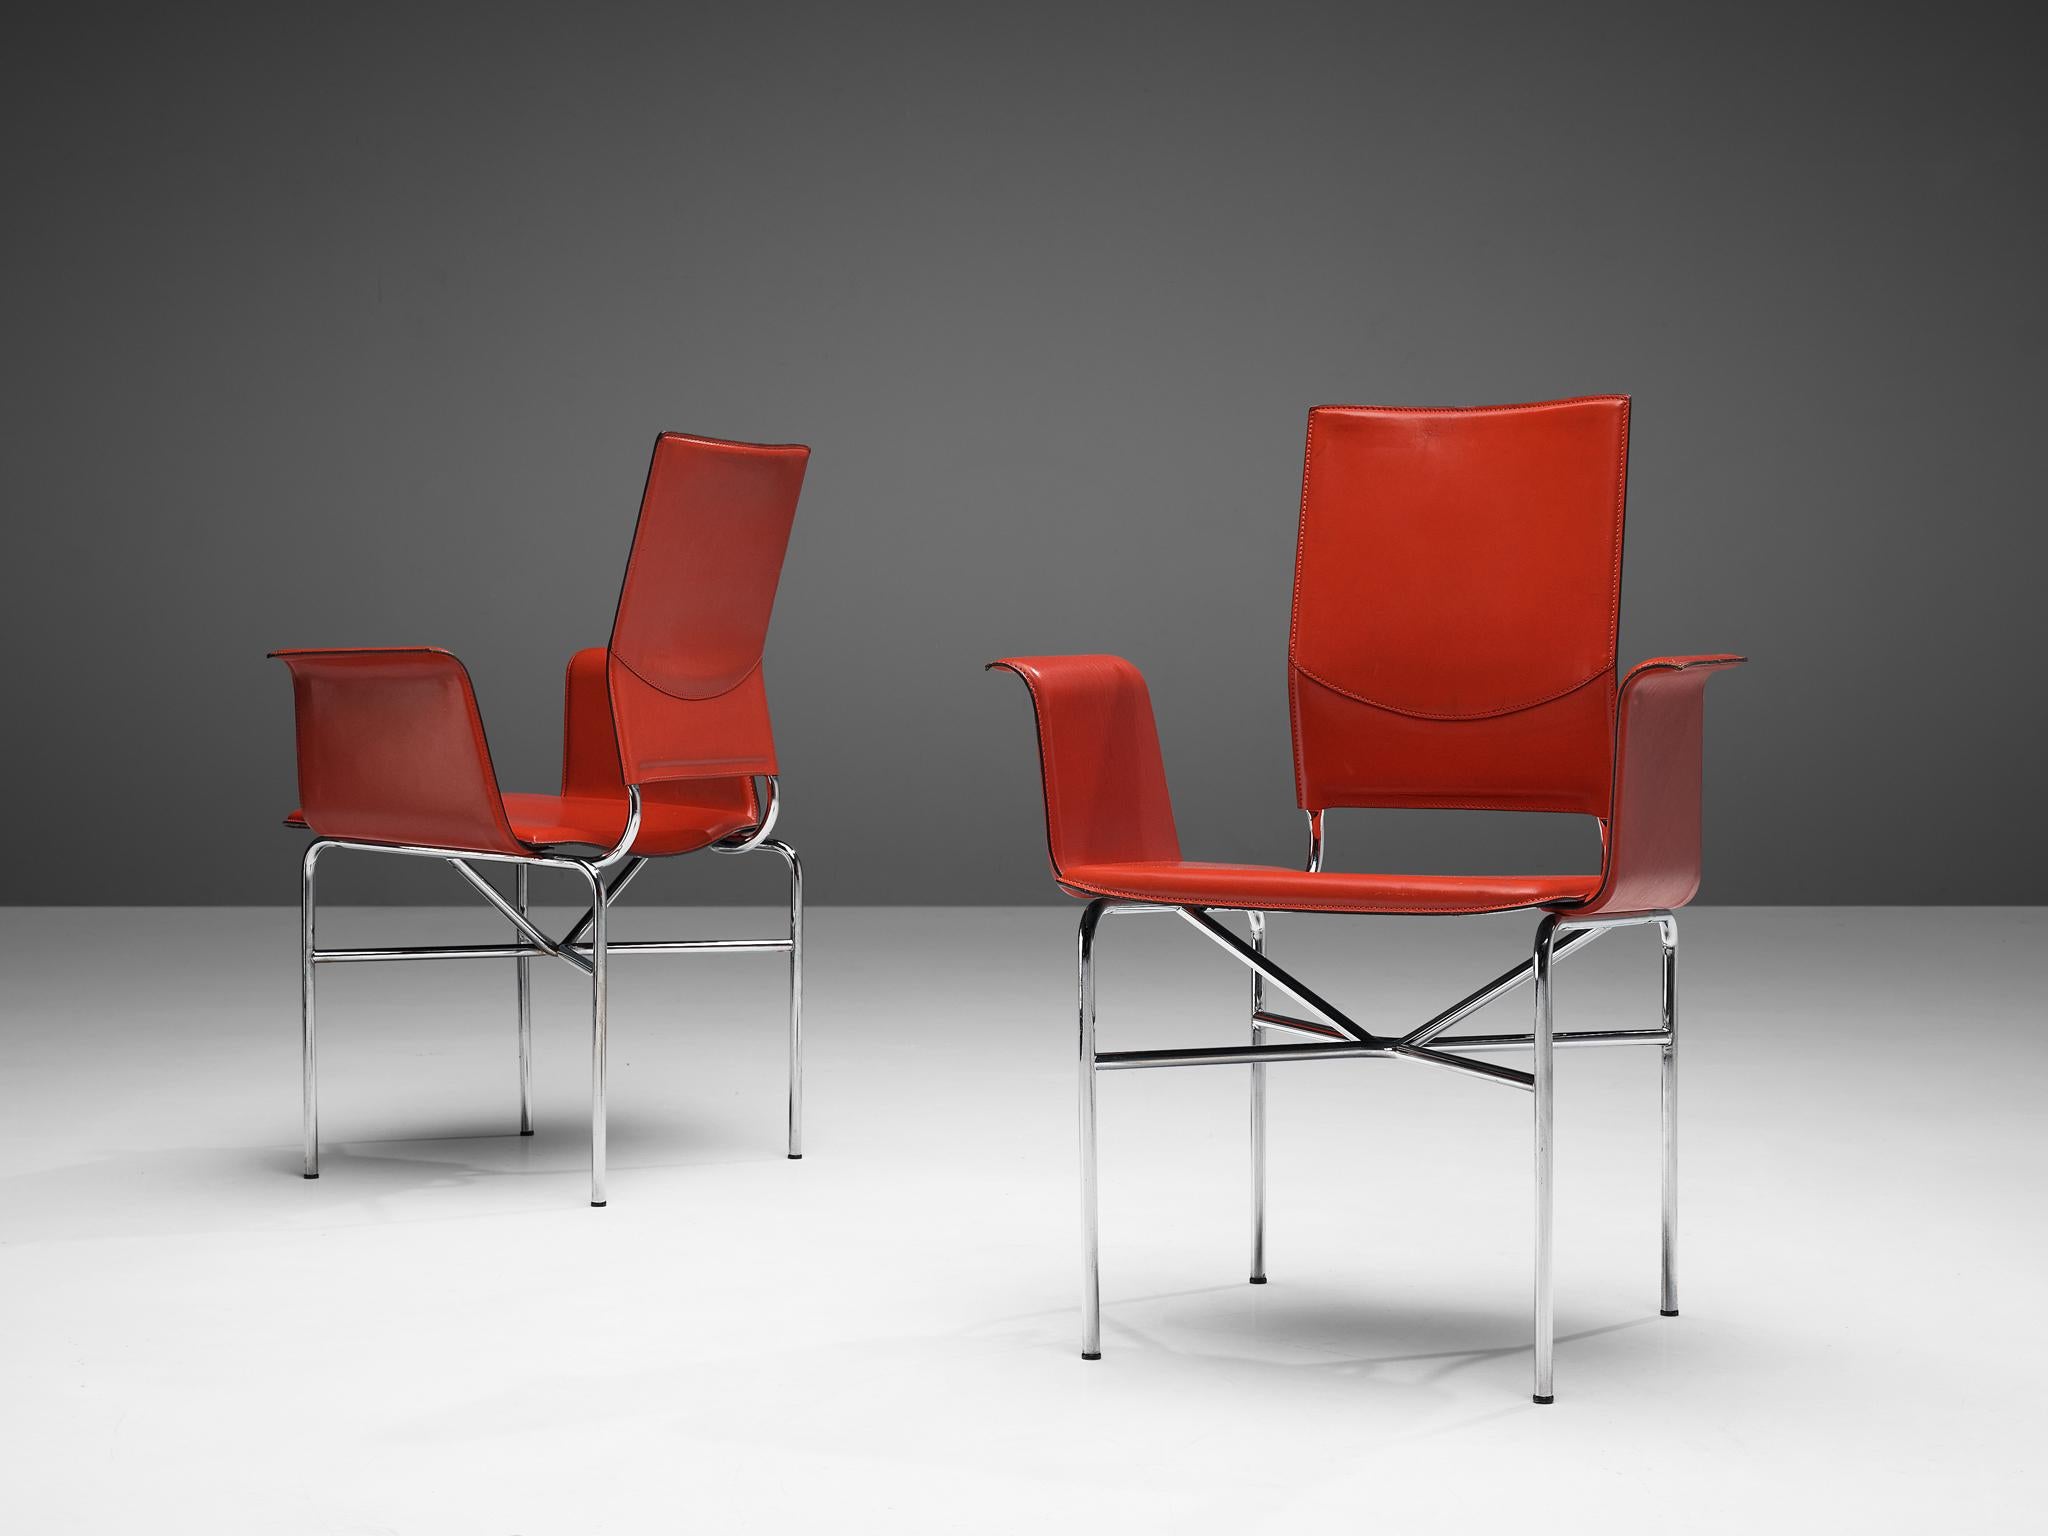 Ross Littell for Matteo Grassi, armchairs, leather, steel, Italy, 1980s

These two red leather chairs are designed by the American designer Ross Littell (1924-2000) for Matteo Grassi. Littell came up with this design during his stay in Italy. The